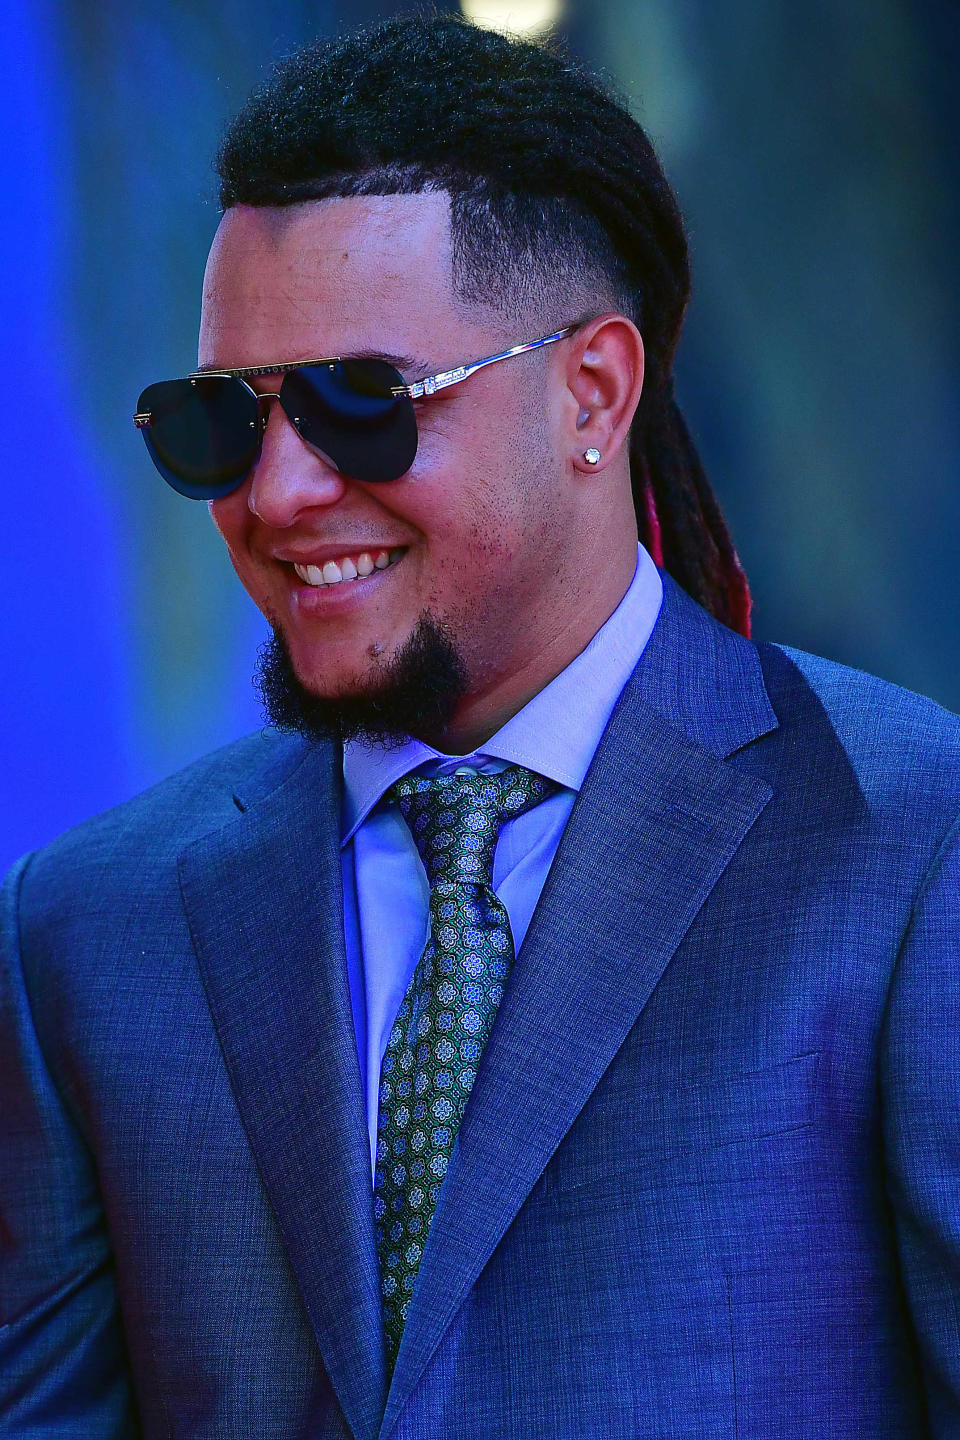 Jul 19, 2022; Los Angeles, CA, USA; National League pitcher Luis Castillo (58) of the Cincinnati Reds during the Red Carpet Show at L.A. Live.